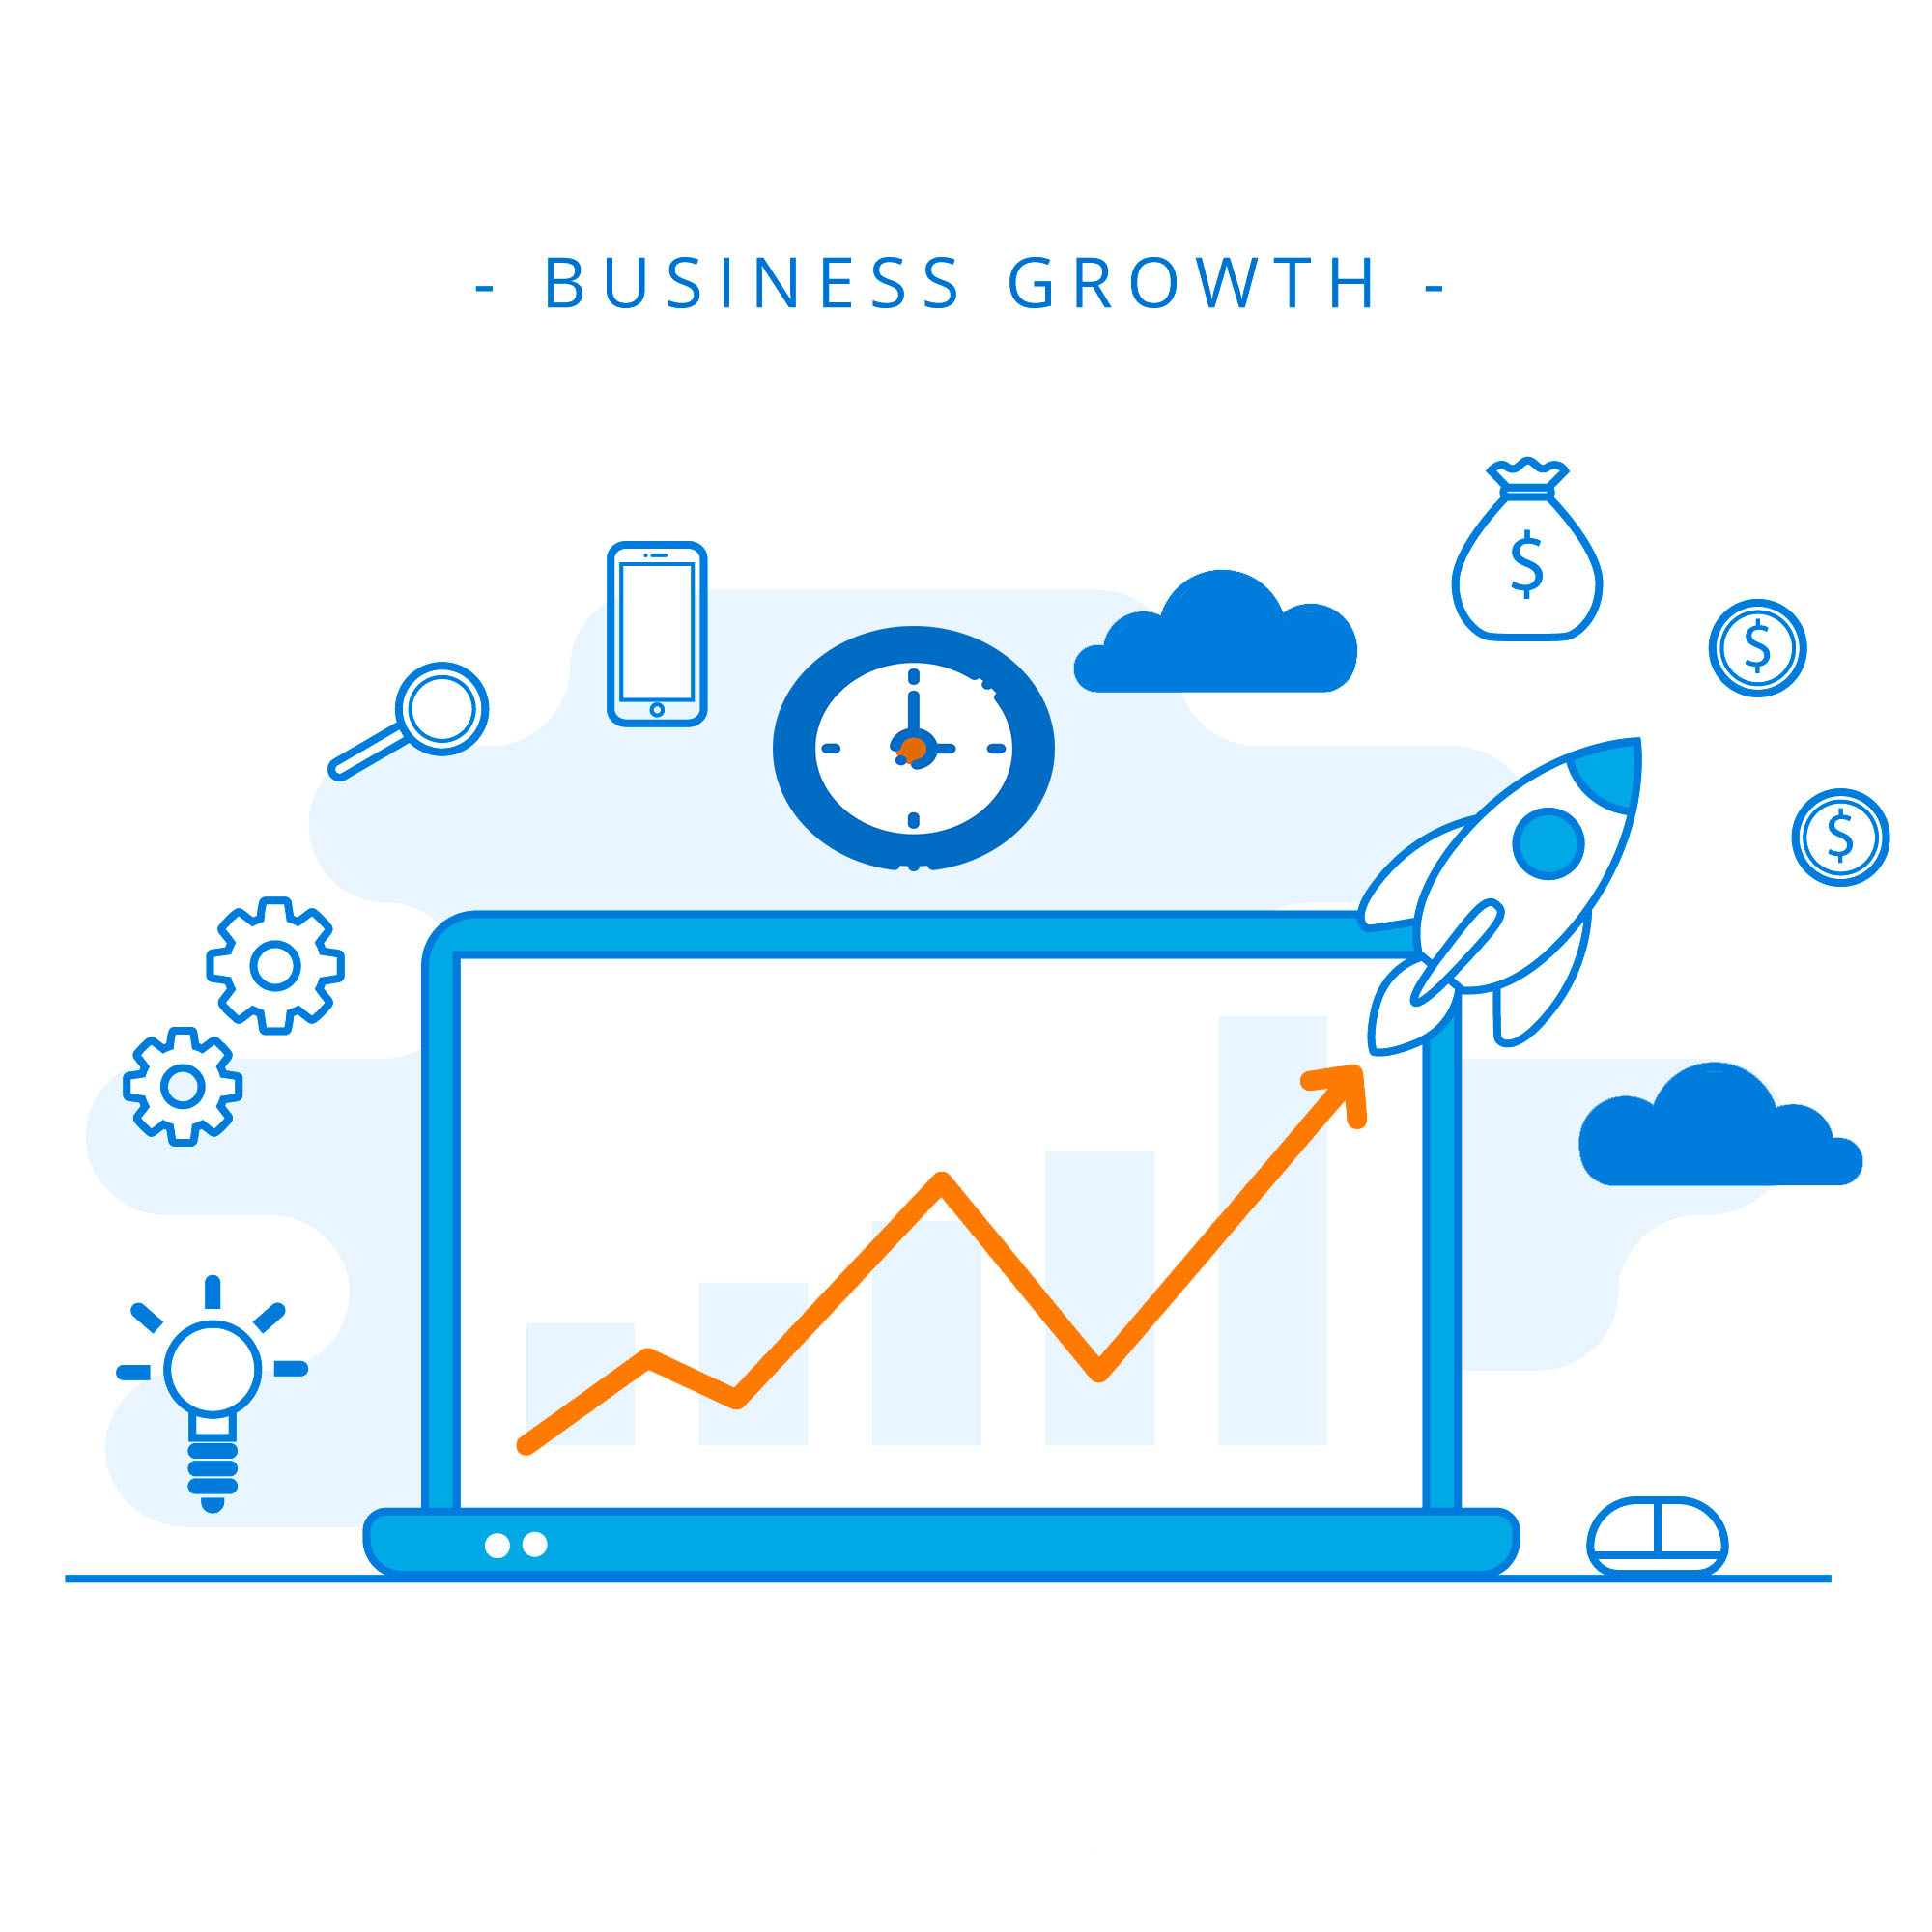 measure your business growth